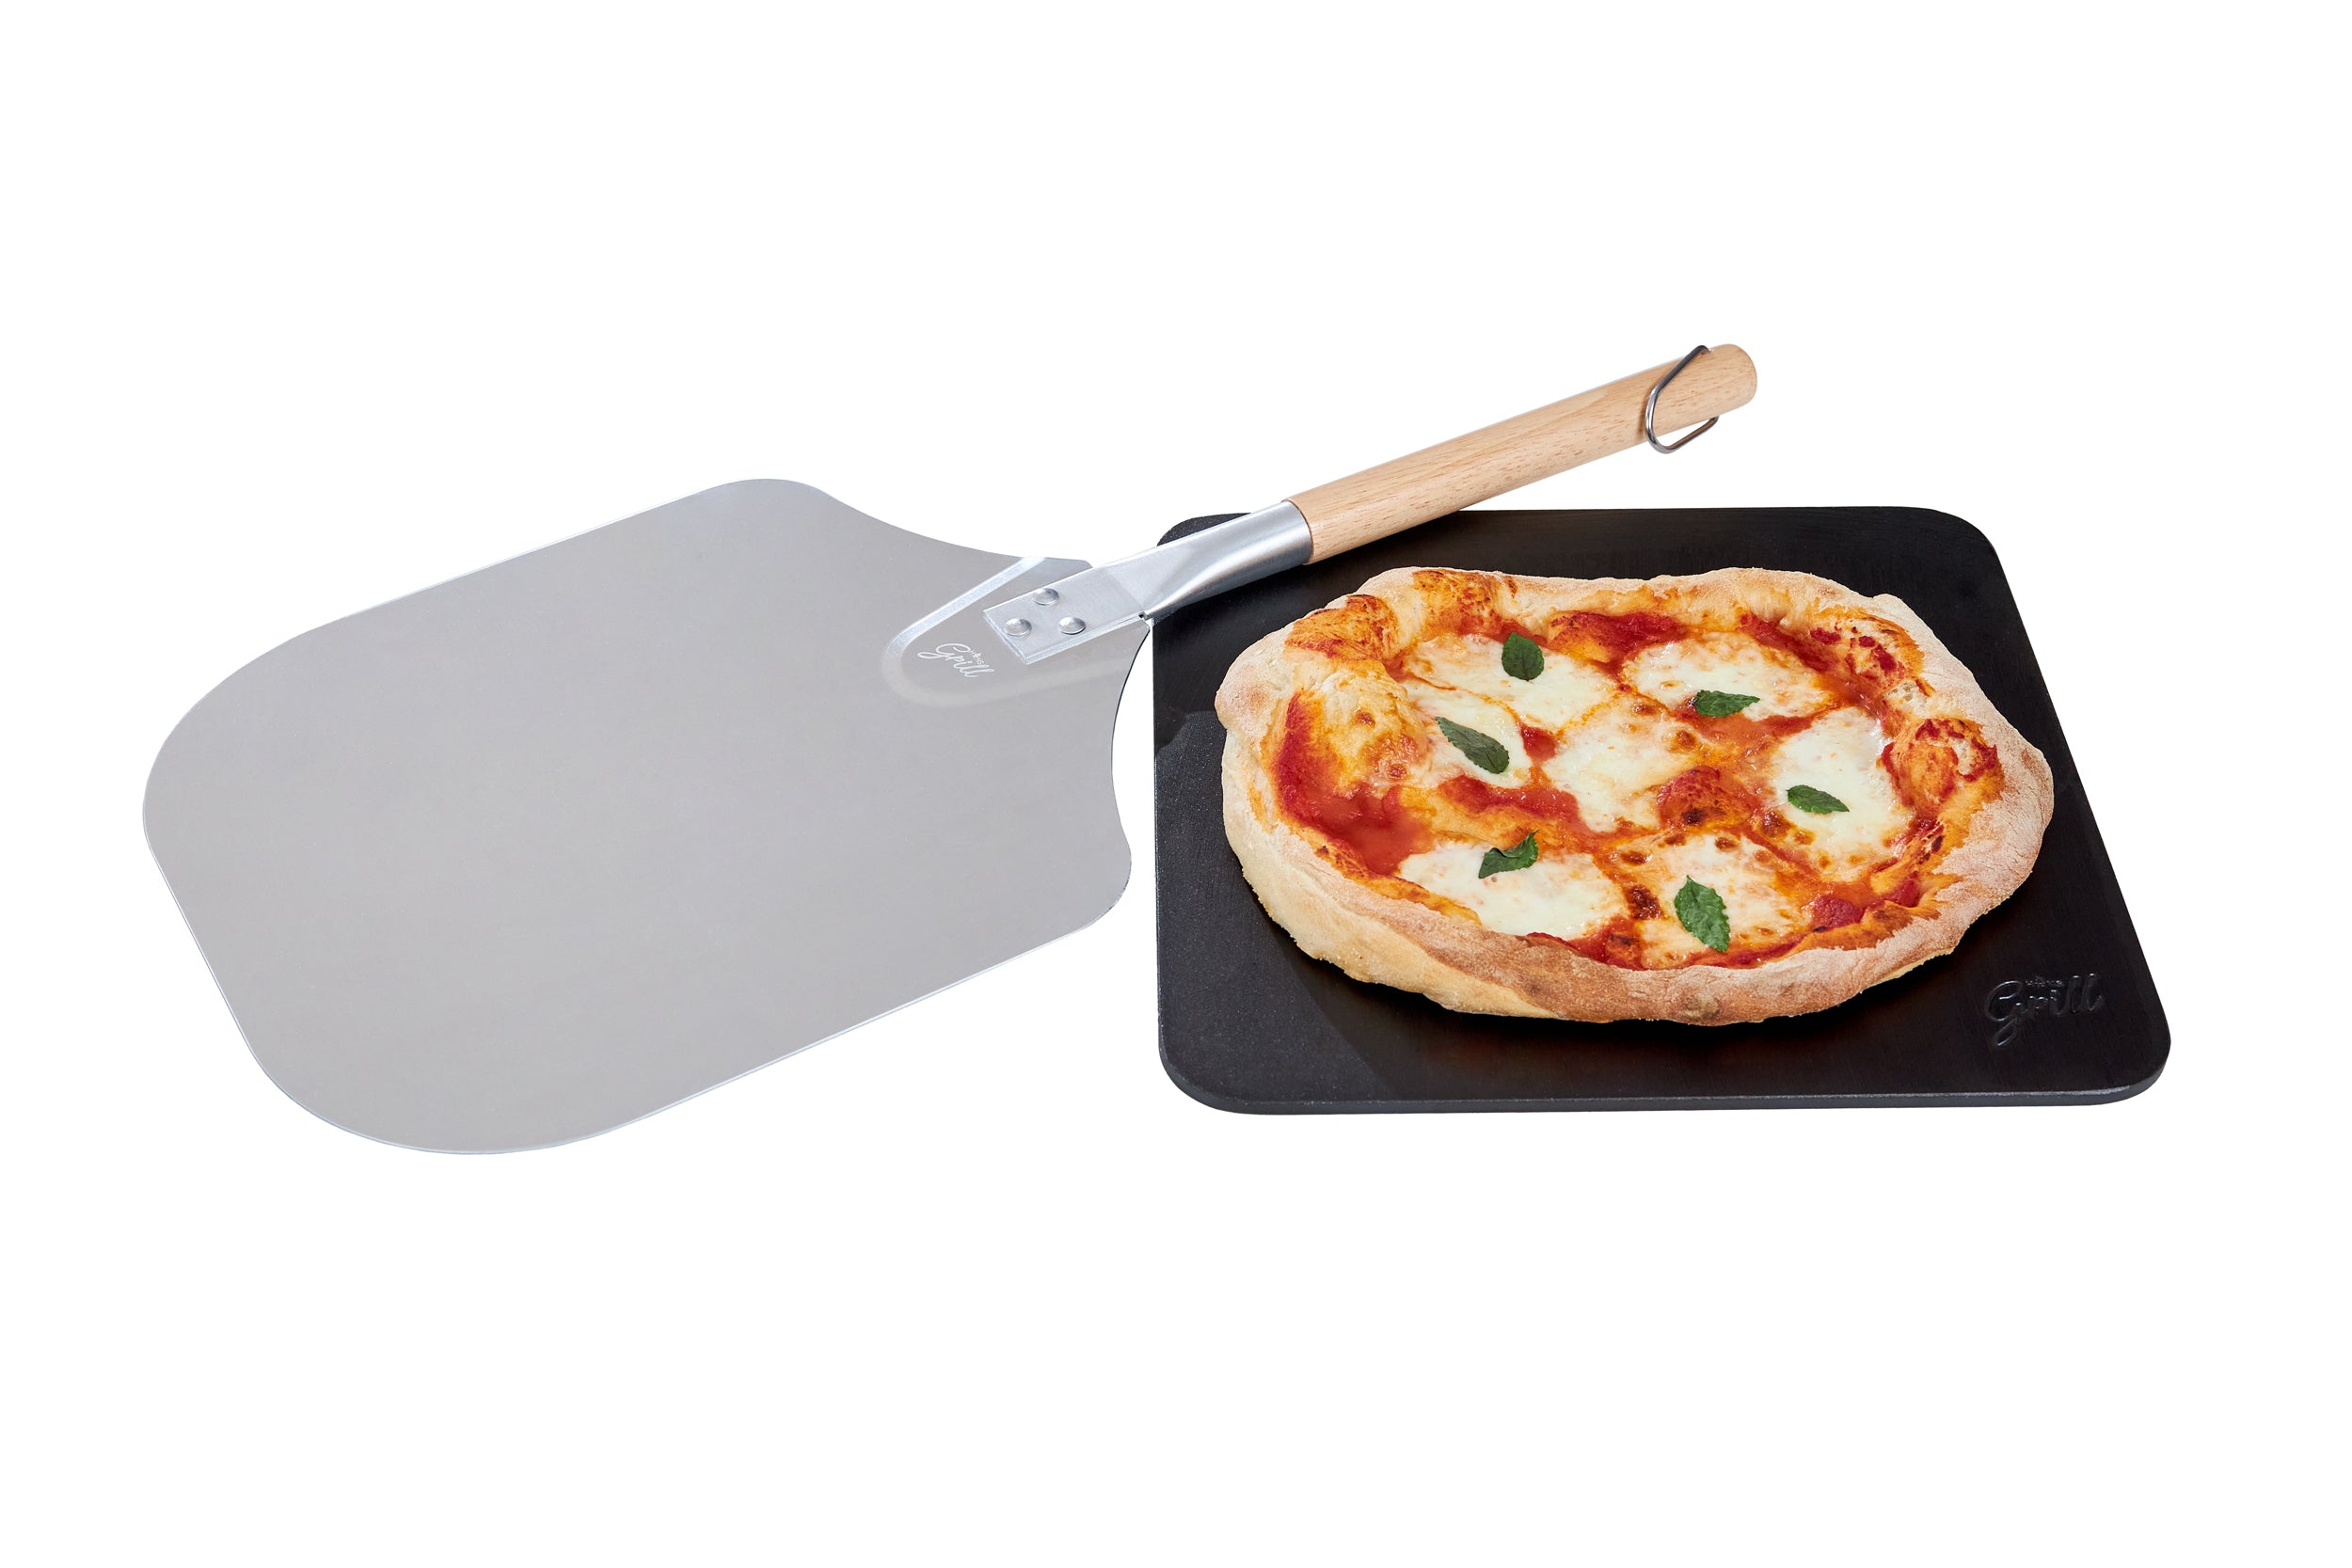  Pizza Steel PRO by Hans Grill, XL (1/4 Thick) Square  Conductive Metal Baking Sheet for Cooking Pizzas in Oven and BBQ